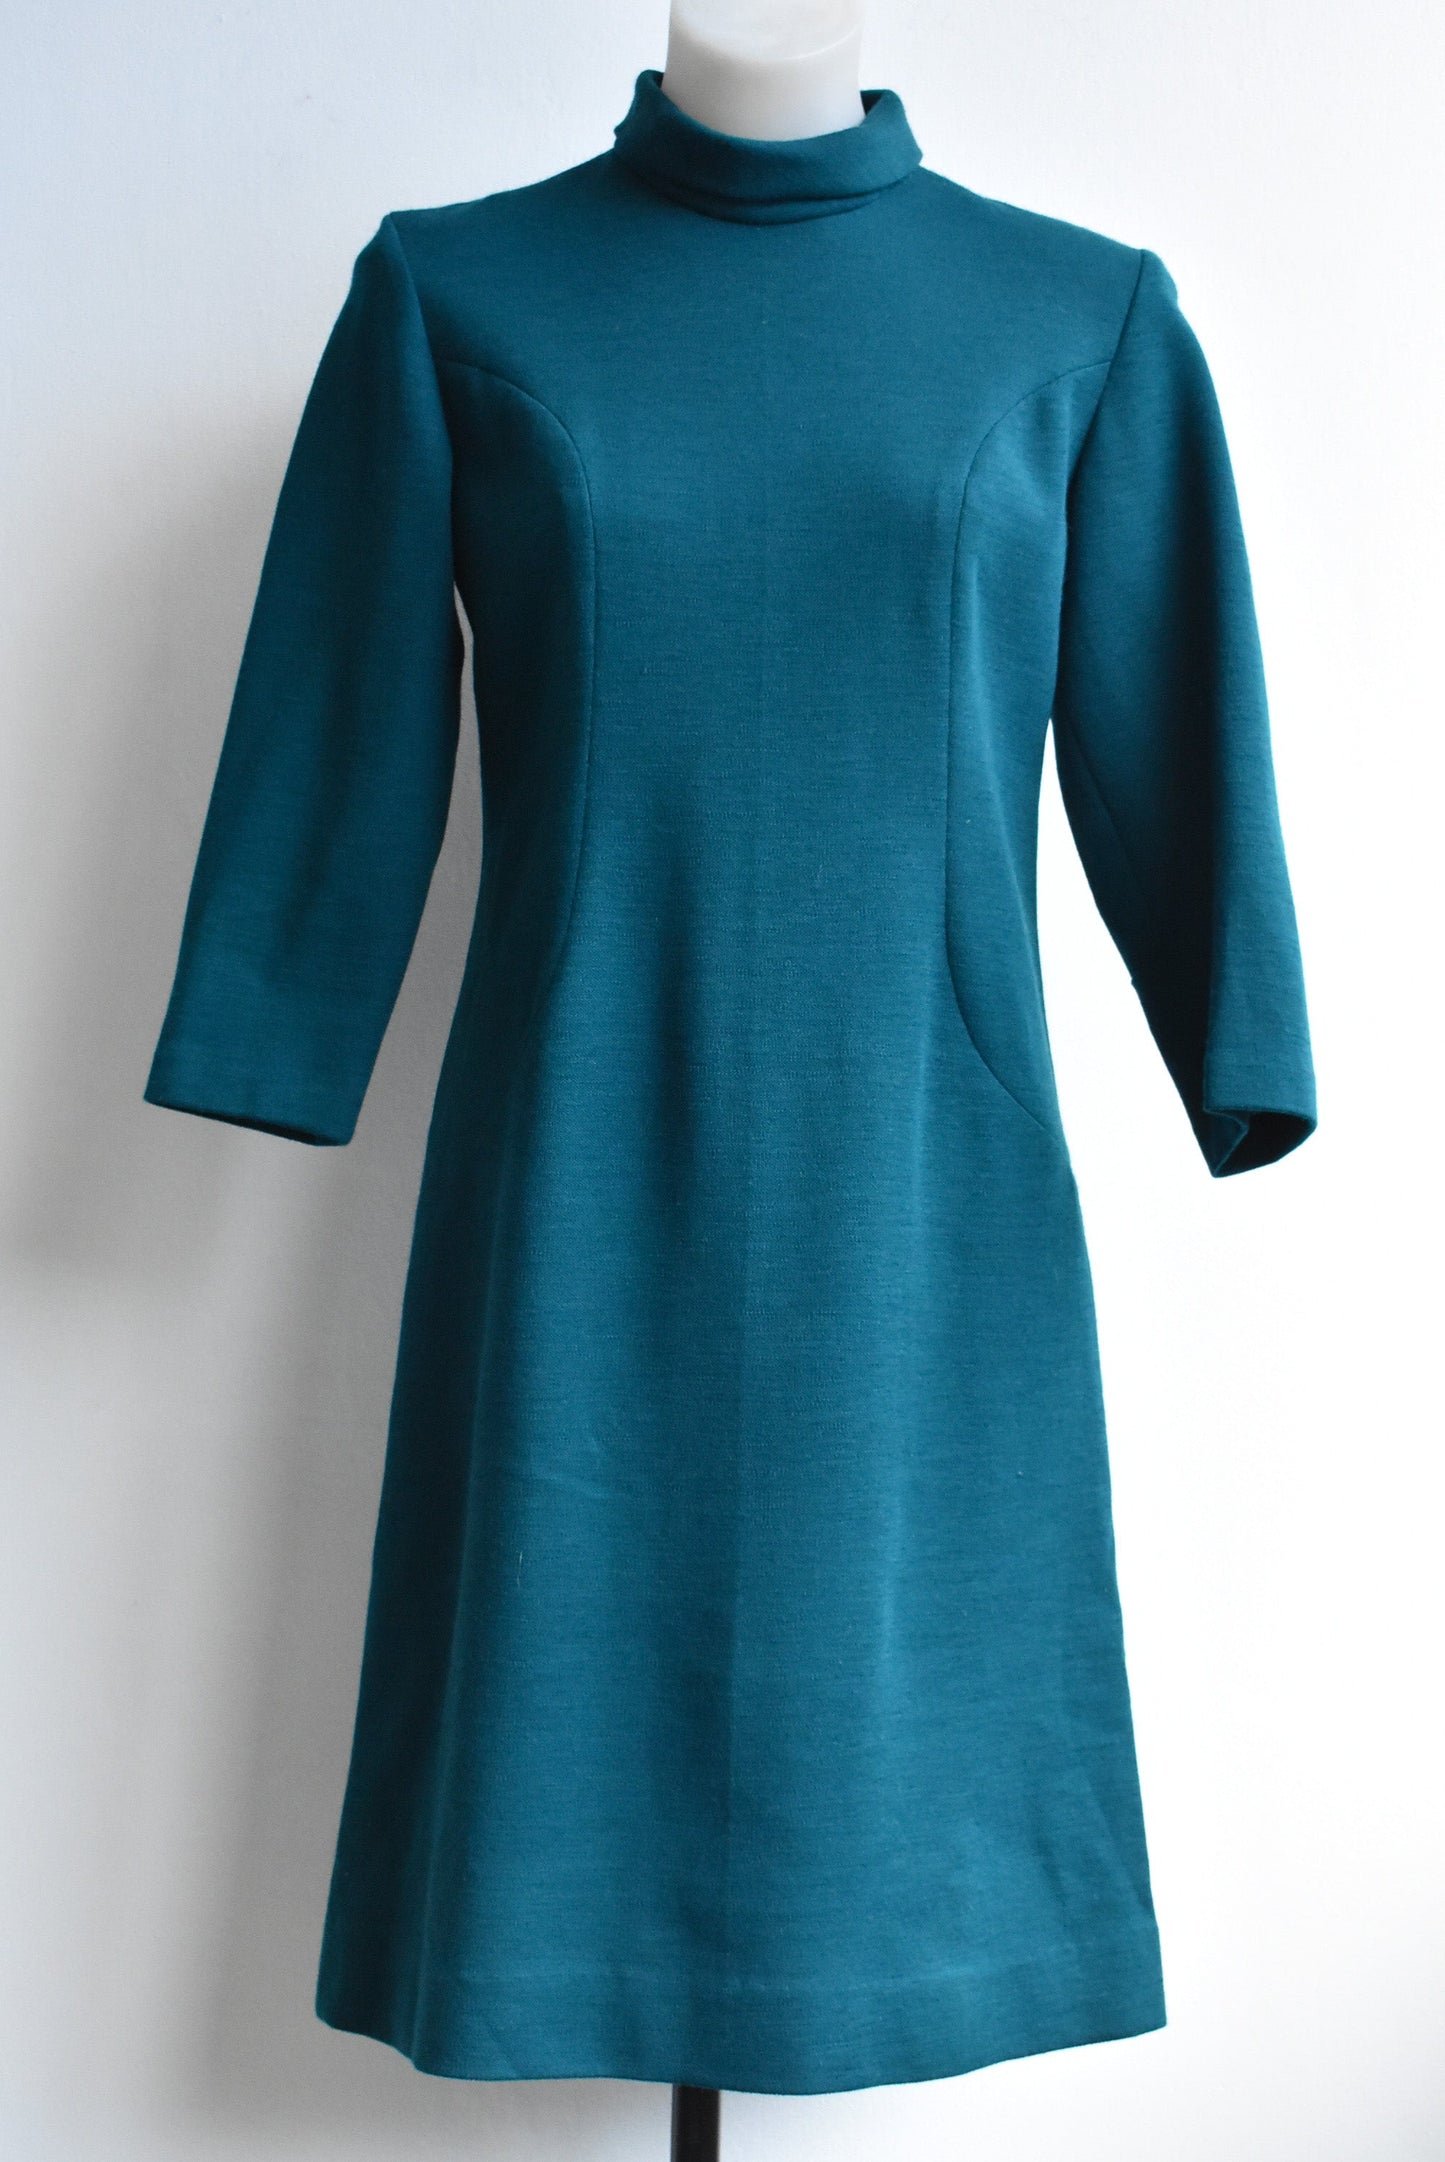 Superior Fashion vintage woolly long-sleeved green dress